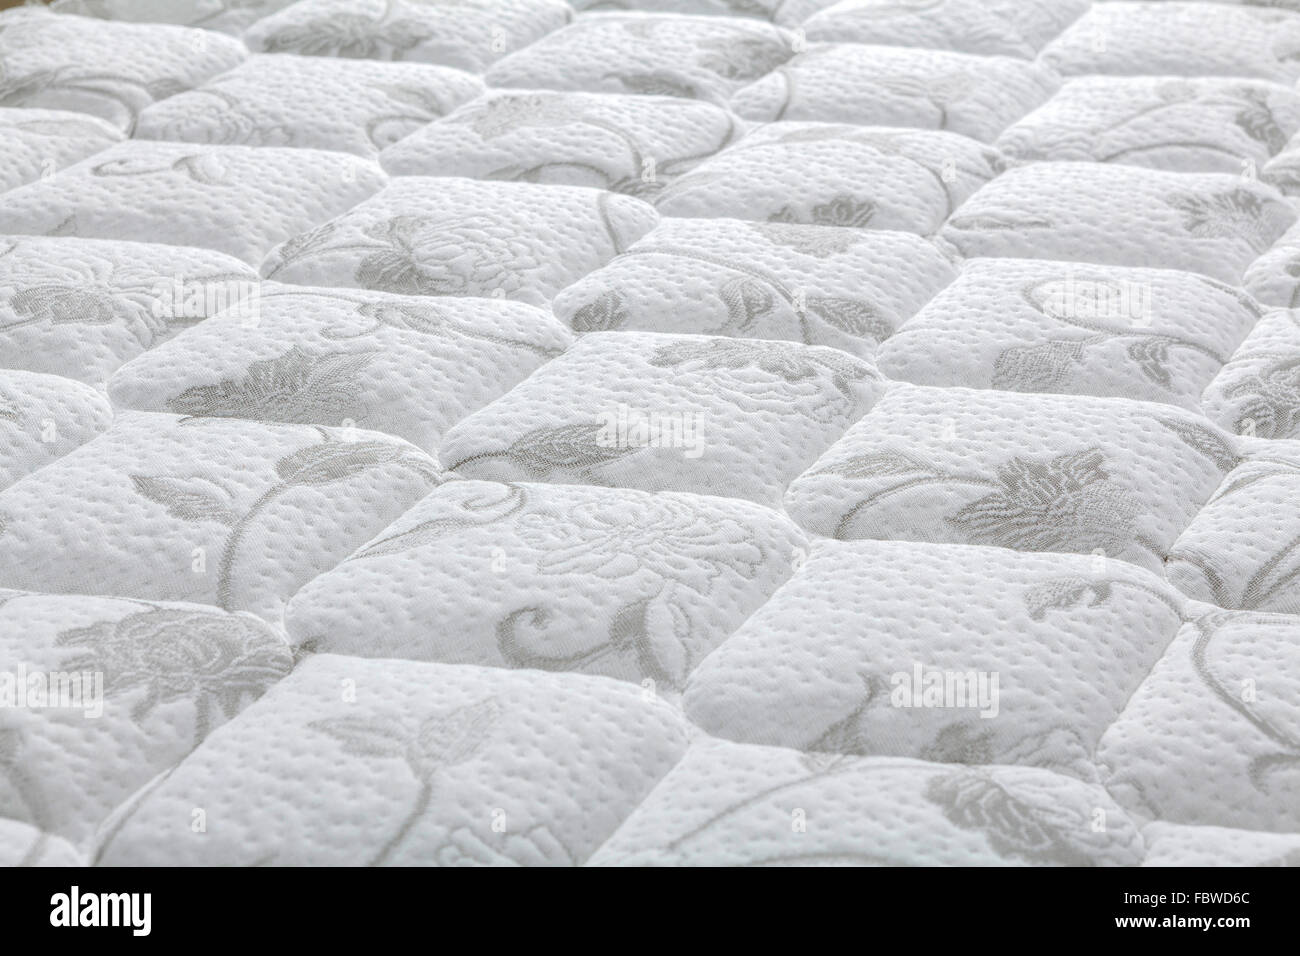 Brand new clean mattress cover surface Stock Photo